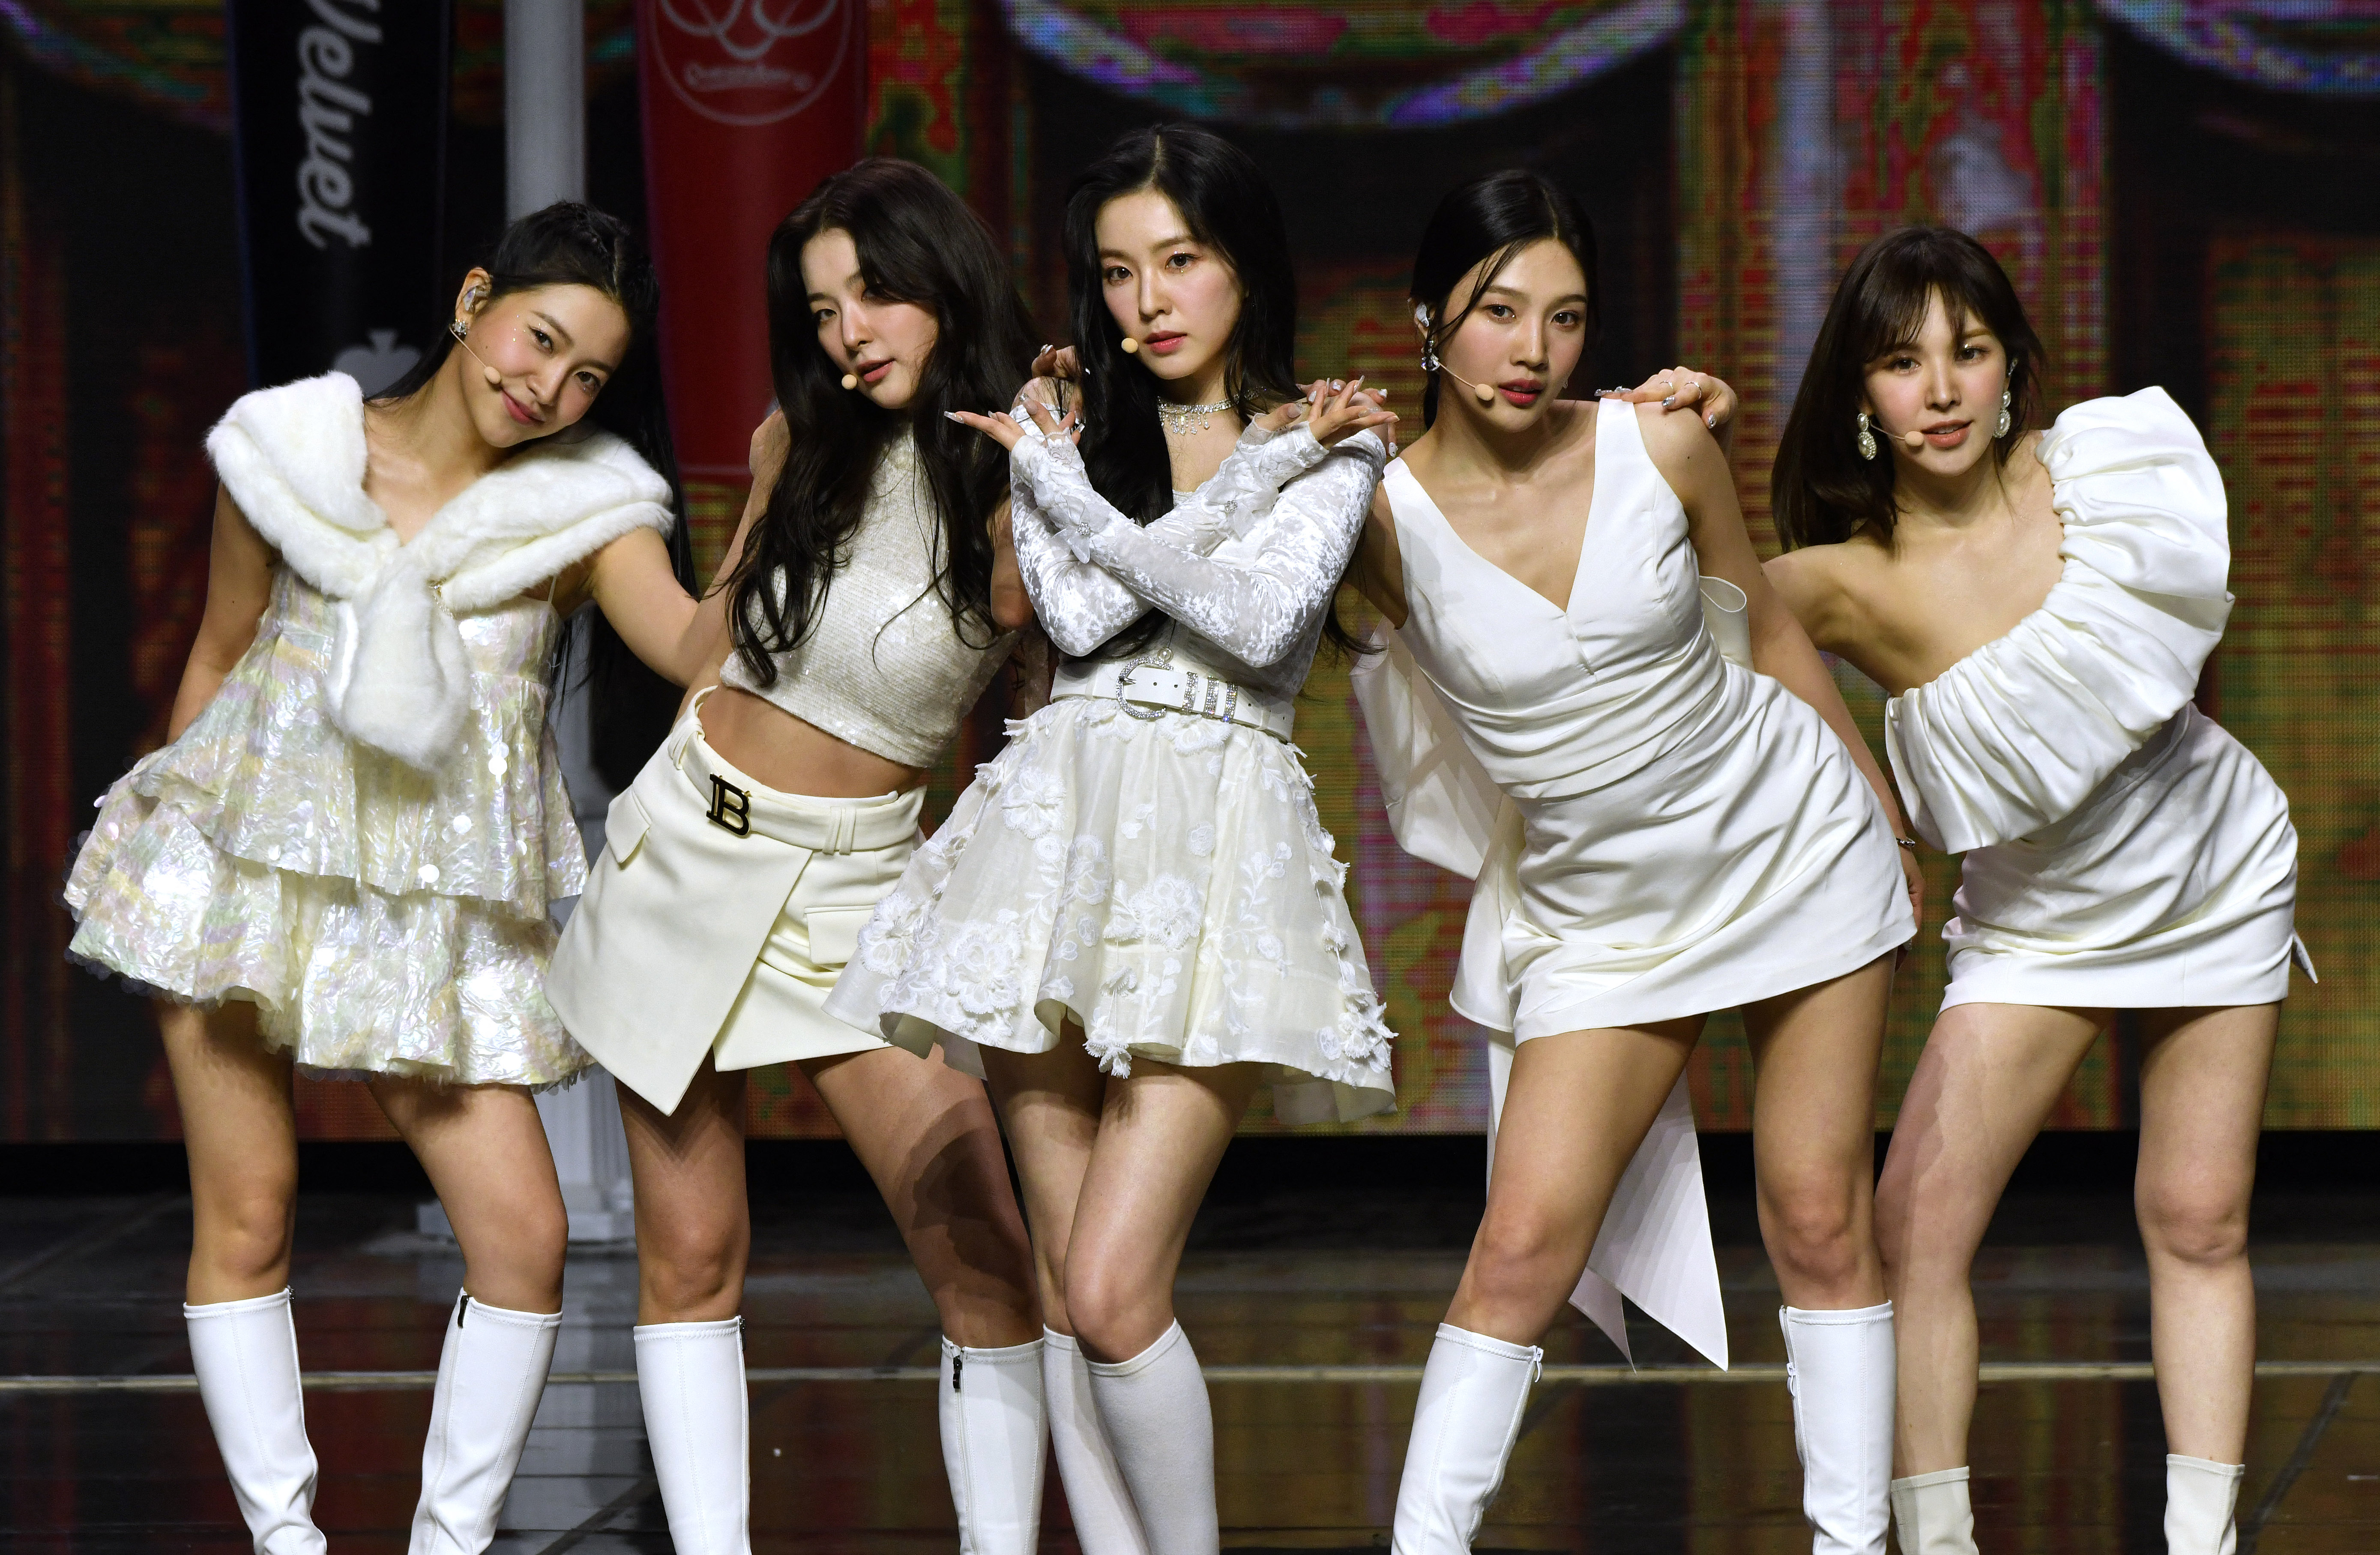 K-pop 'Coachella' on campus? There’s a festival for that in Korean unis each year